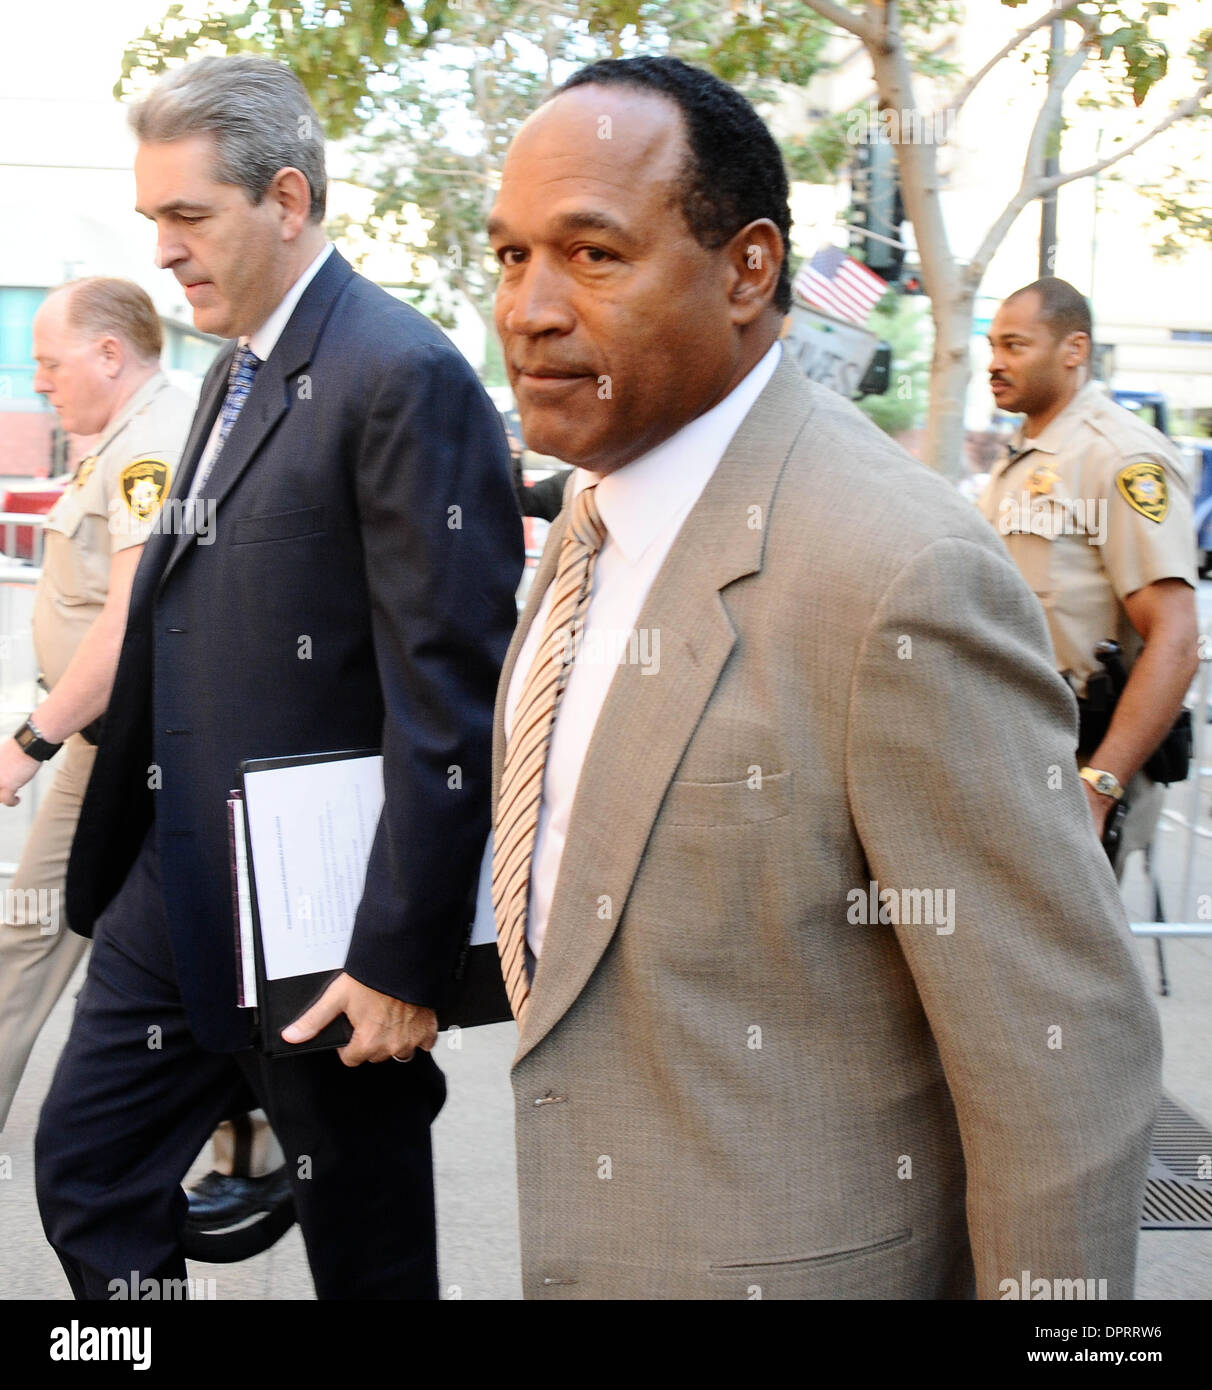 Dec 05, 2008 - Las Vegas, Nevada, USA - A broken O.J. Simpson has been sentenced to at least 15 years in prison for a Las Vegas hotel armed robbery by a judge who rejected his apology and said, 'It was much more than stupidity.' The former US football star and actor was accused of robbing two dealers of sports memorabilia in 2007. PICTURED - Sep 15, 2008 - Las Vegas - O.J. SIMPSON  Stock Photo